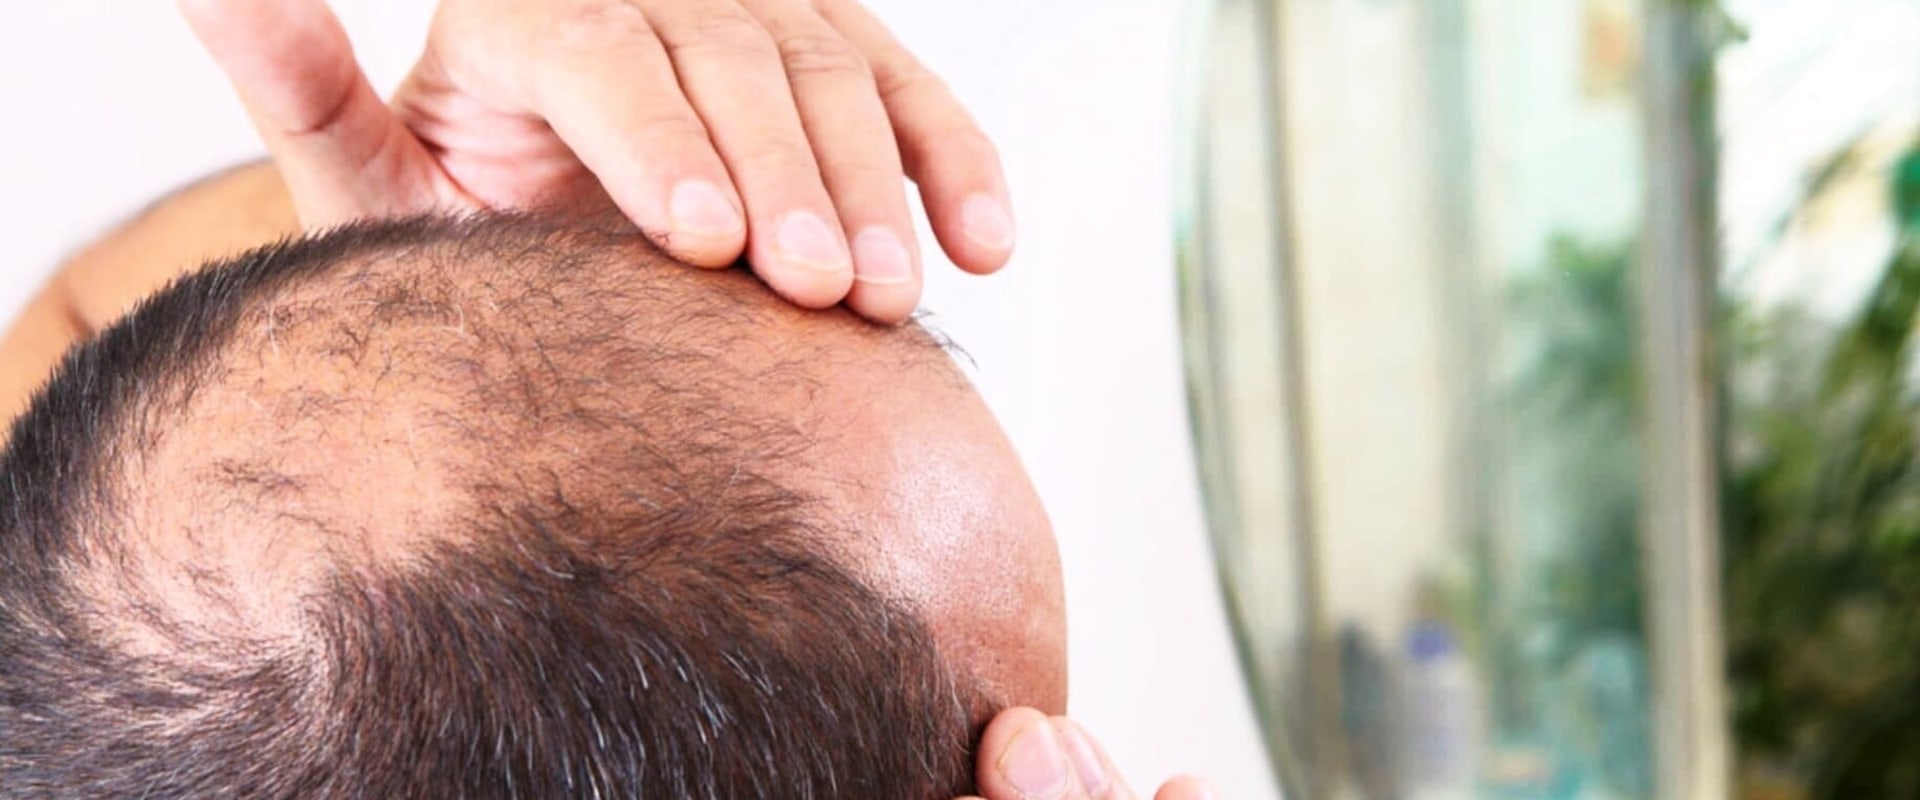 Lifestyle Factors and Male Pattern Baldness